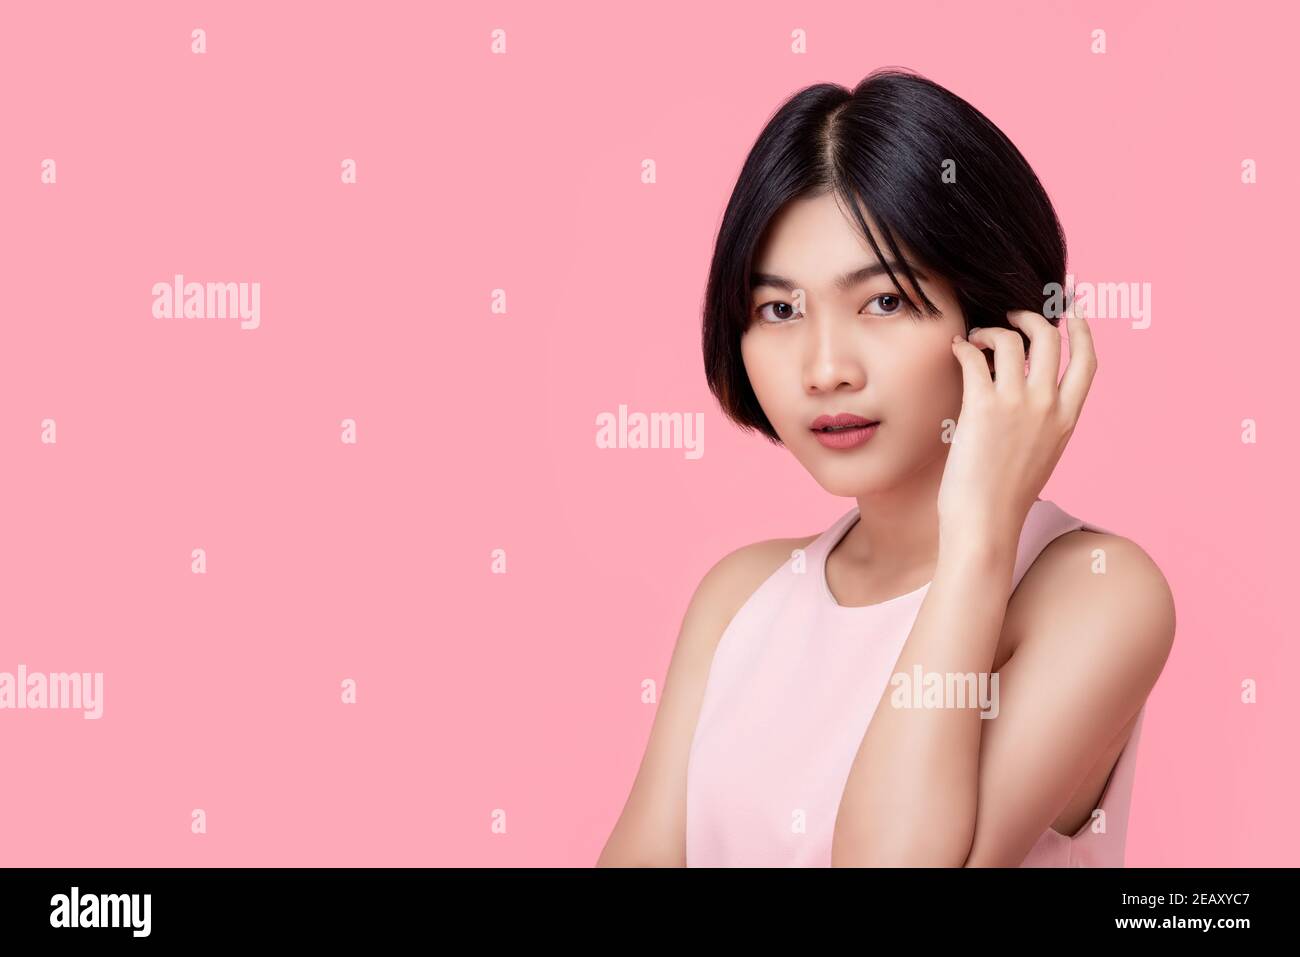 Young short hair discreet Asian woman model wearing sleeveless blouse looking at camera isolated in pink studio backgound with copy space Stock Photo